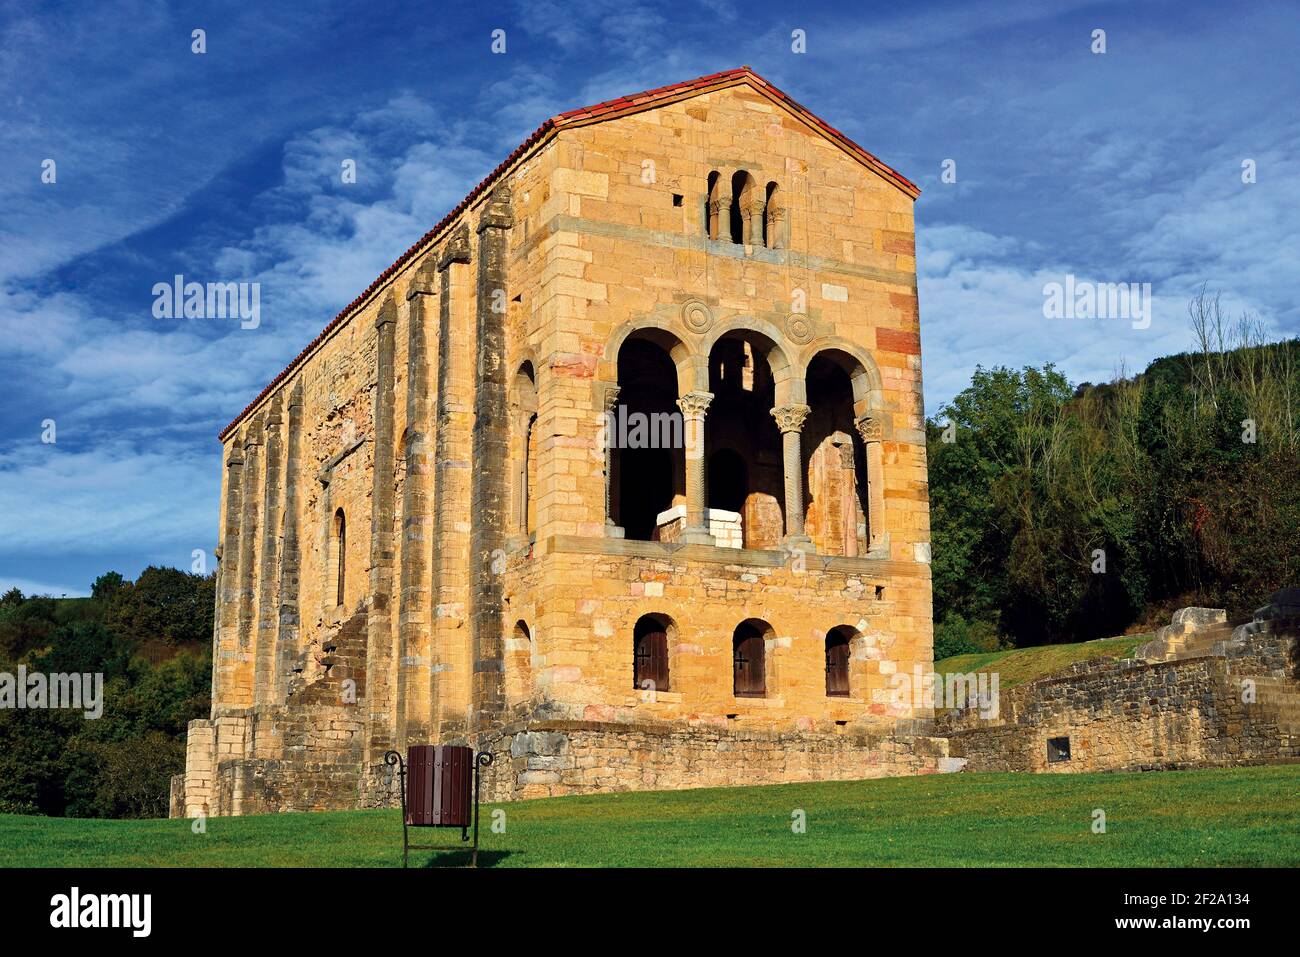 Pre-Romanesque temple standing alone surrounded by green hills and grass field (Santa Maria del Naranco, Oviedo) Stock Photo